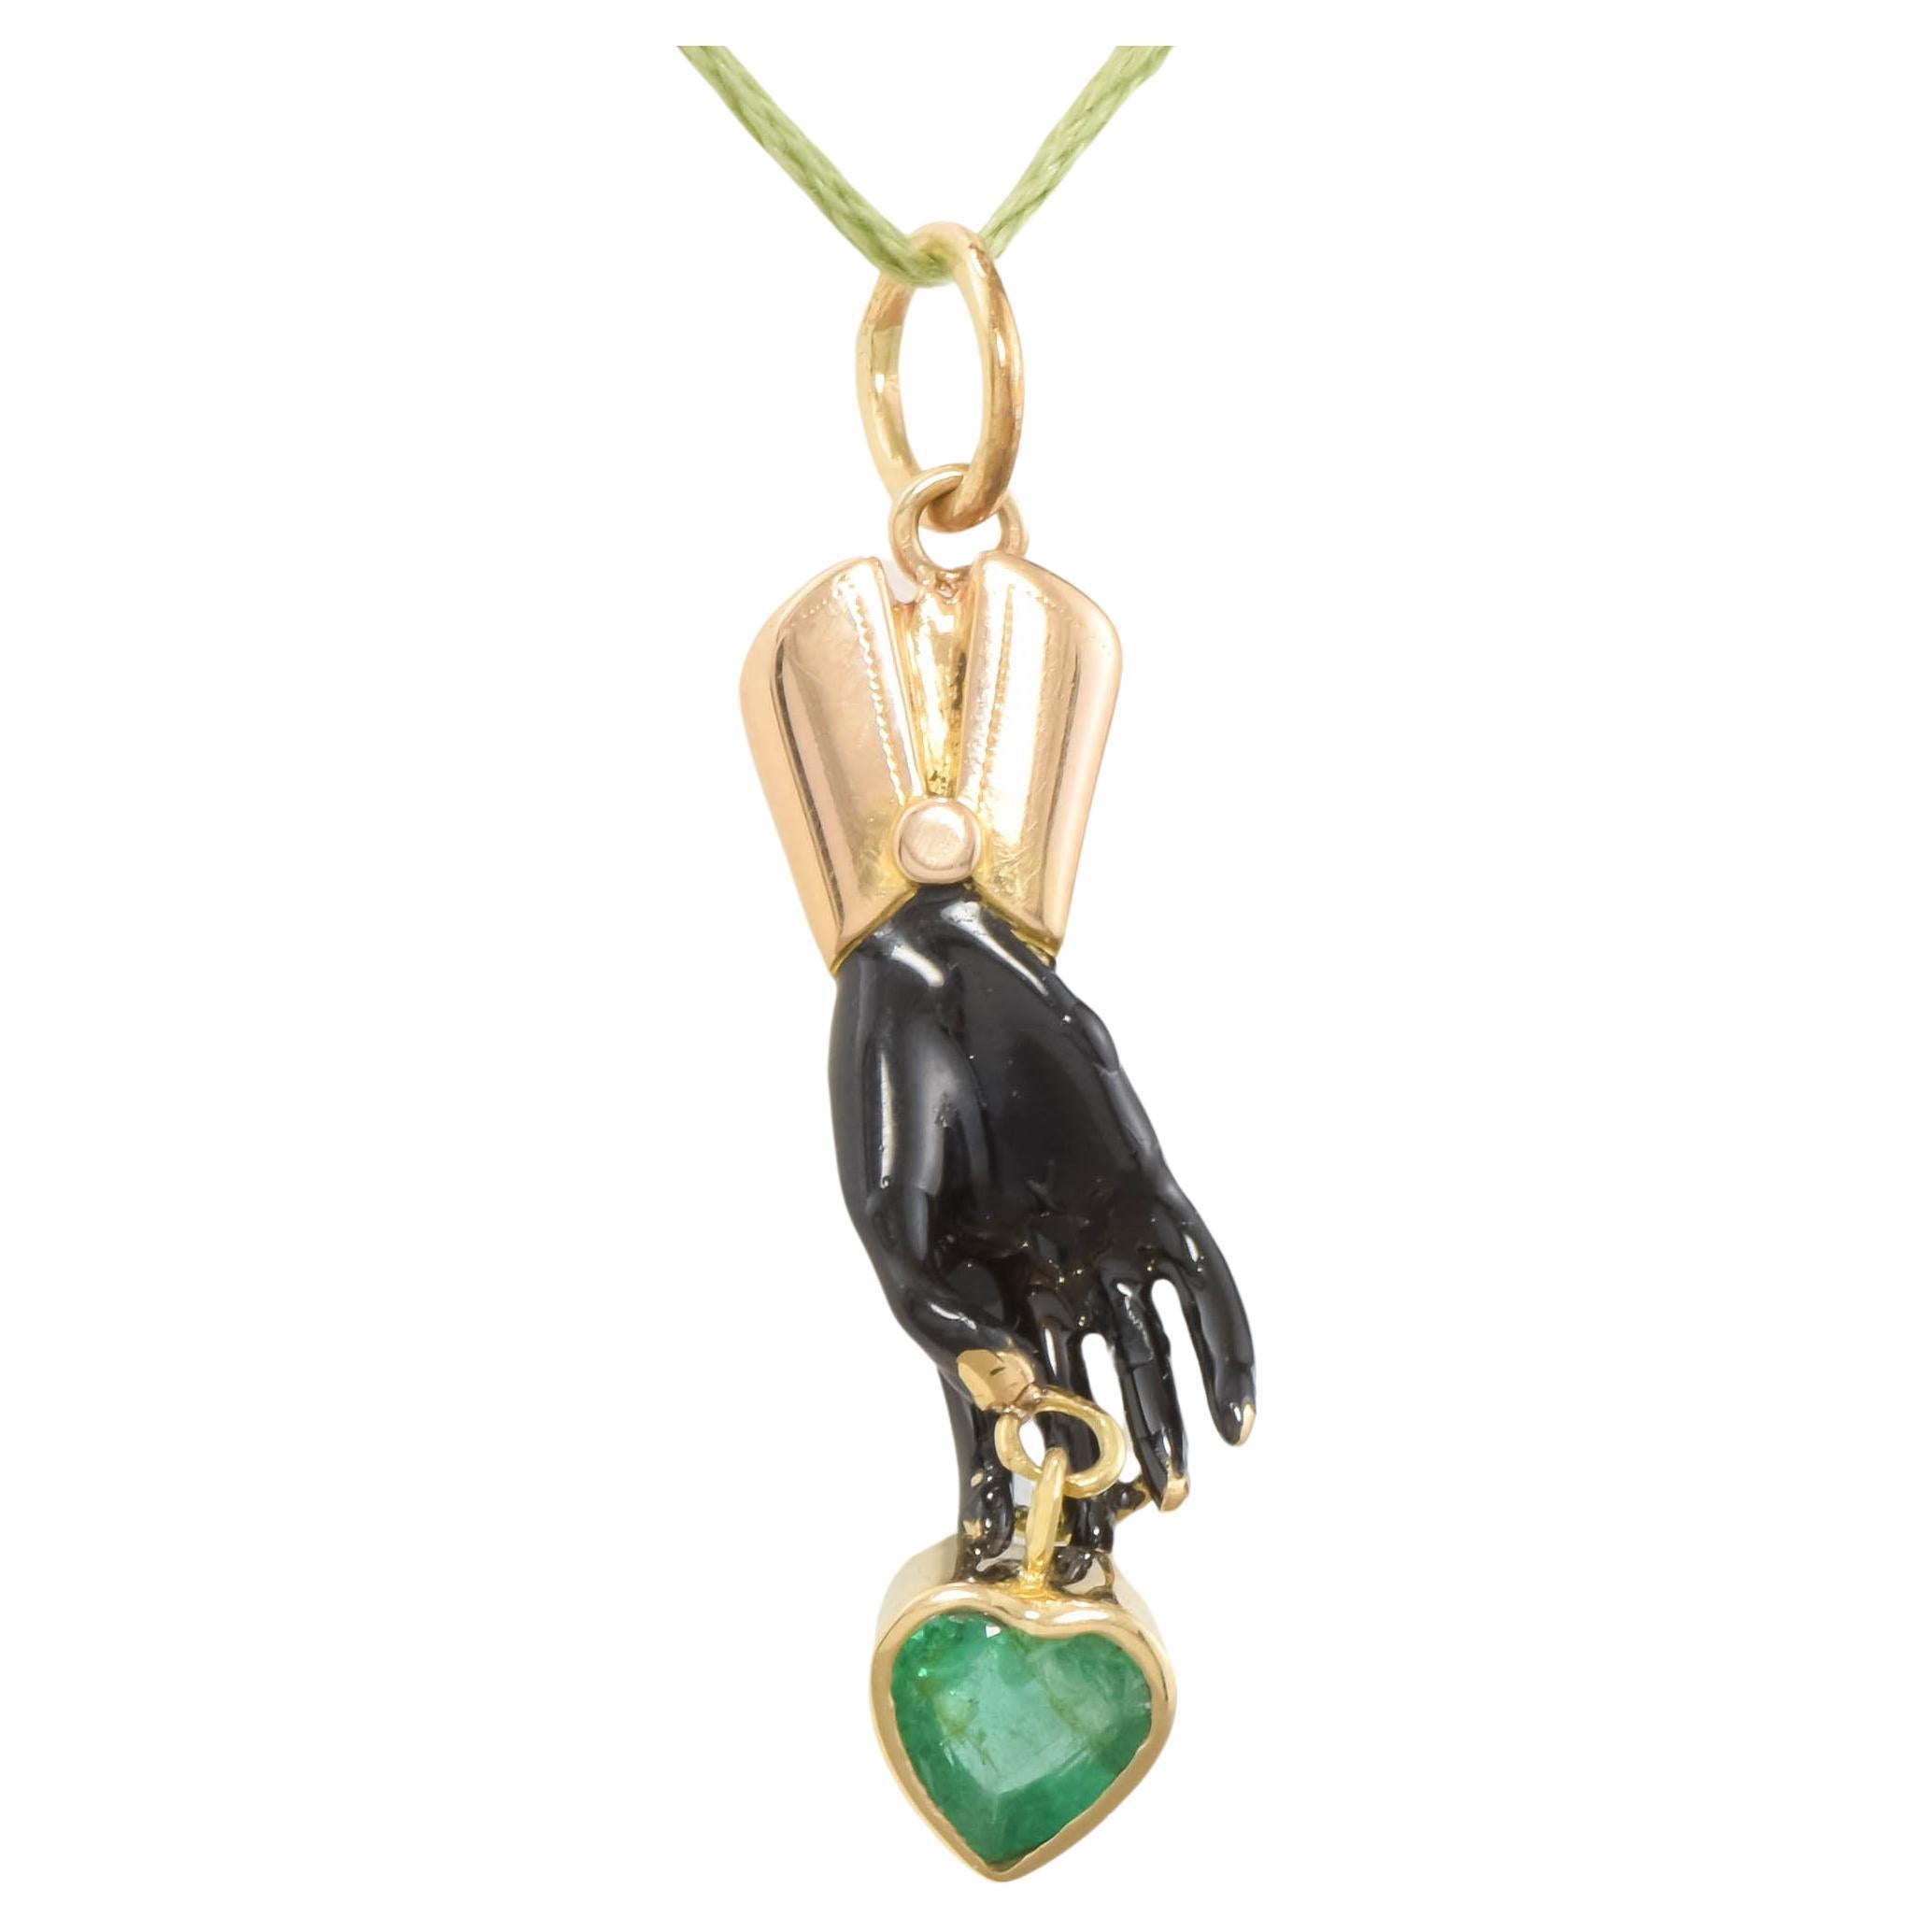 This is a one-of-a-kind pendant charm that was converted from an antique stickpin that had been damaged.  Now it may be enjoyed worn on a chain, with the heart shaped natural emerald drop I have added.

Testing as 18K gold for the hand and buttoned